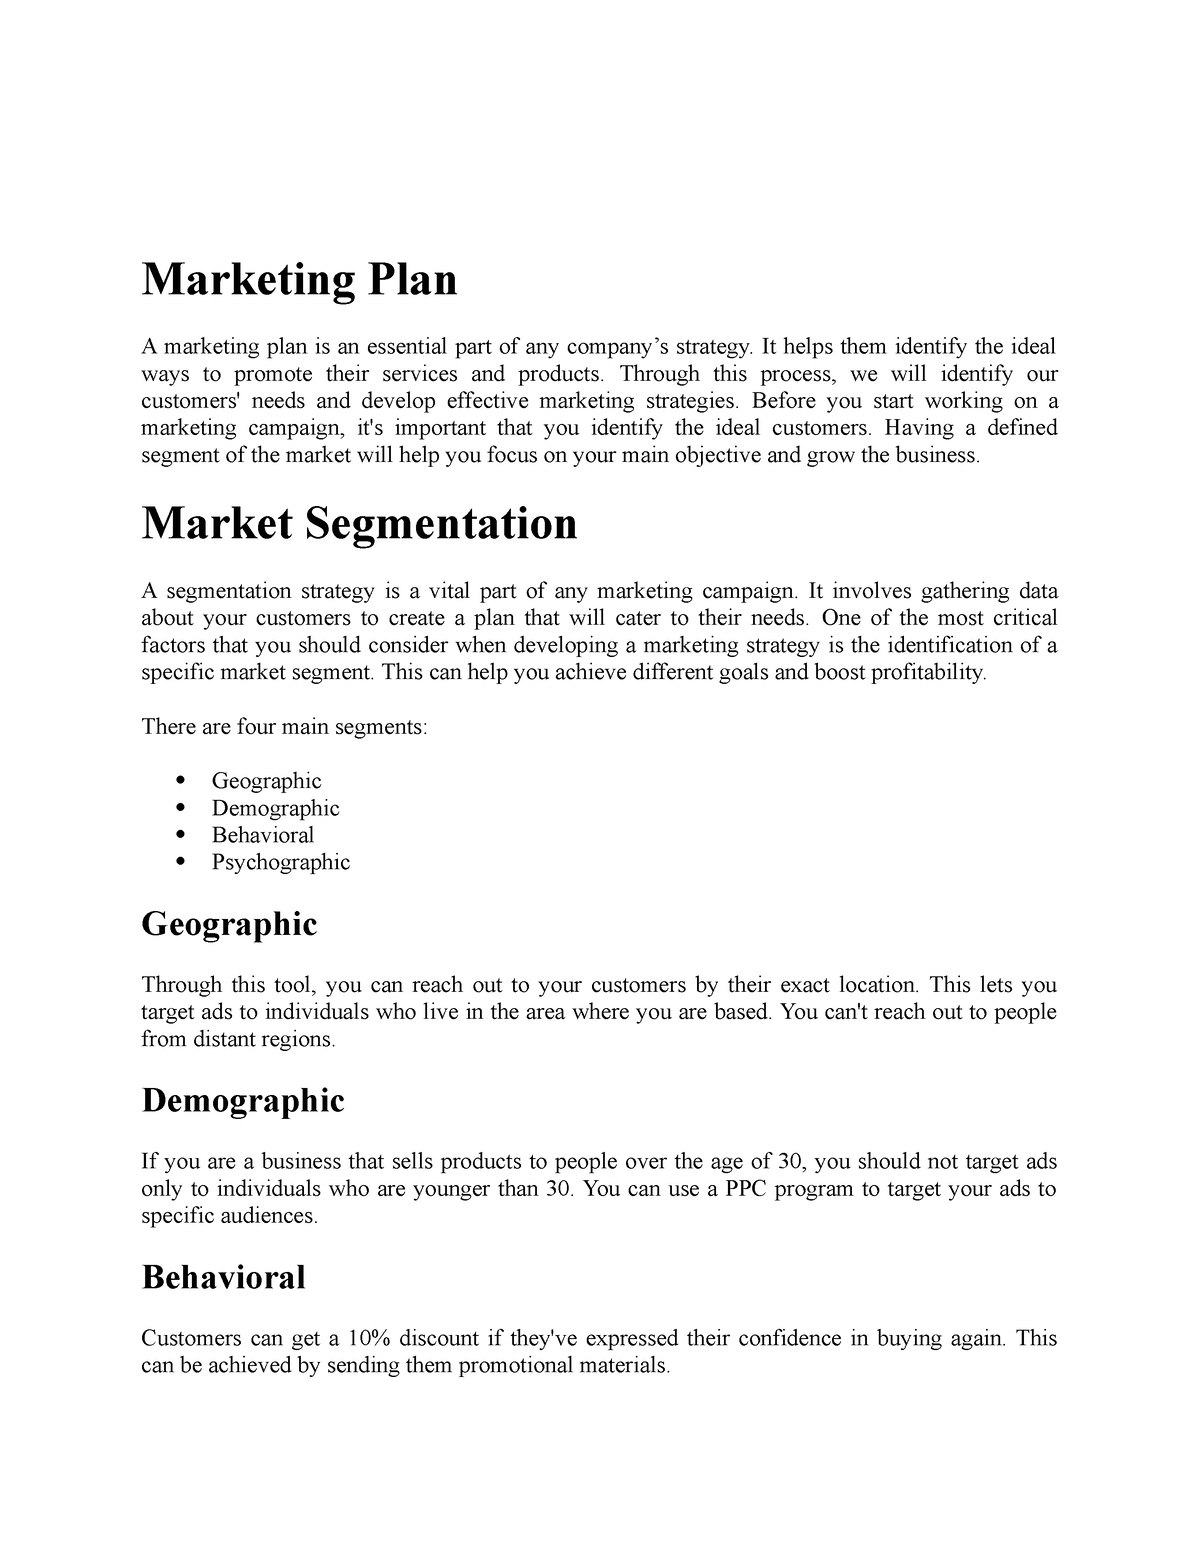 assignment marketing plan exercise